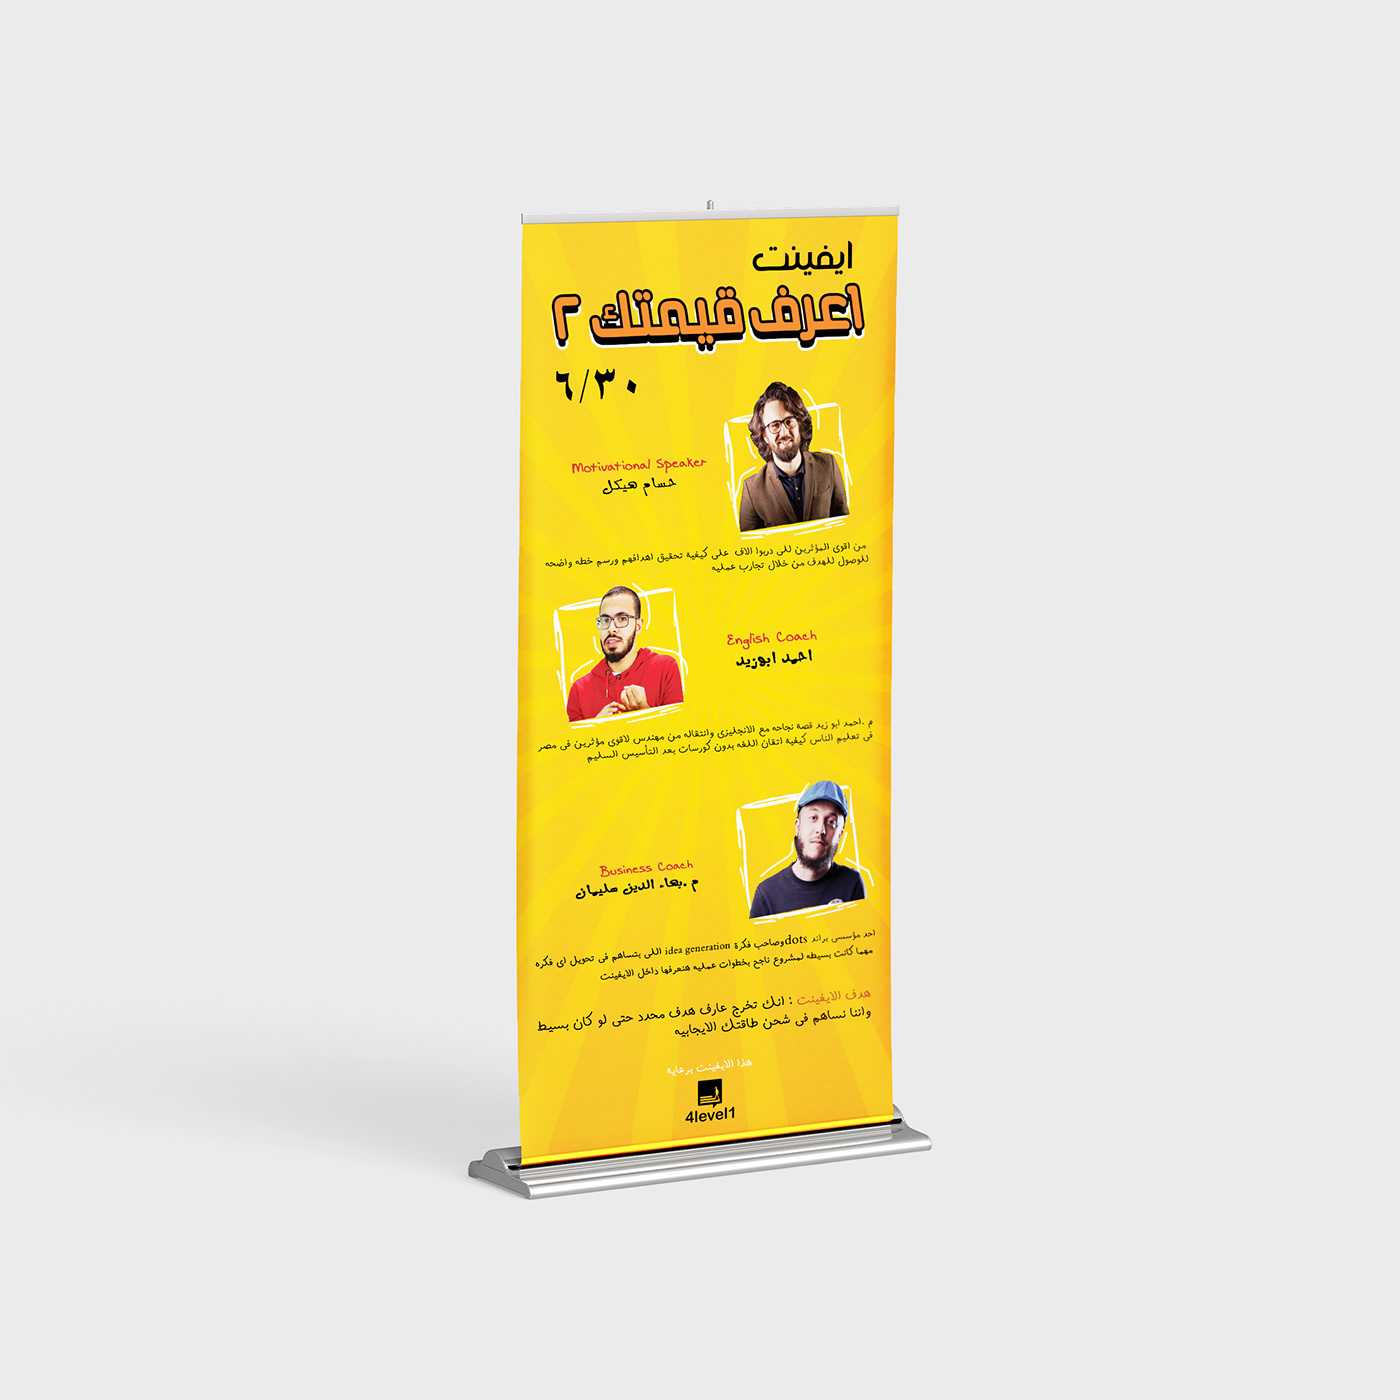 Roll Up rollupdesign design branding  Event eventdesigns graphicdesigns ArtDirection